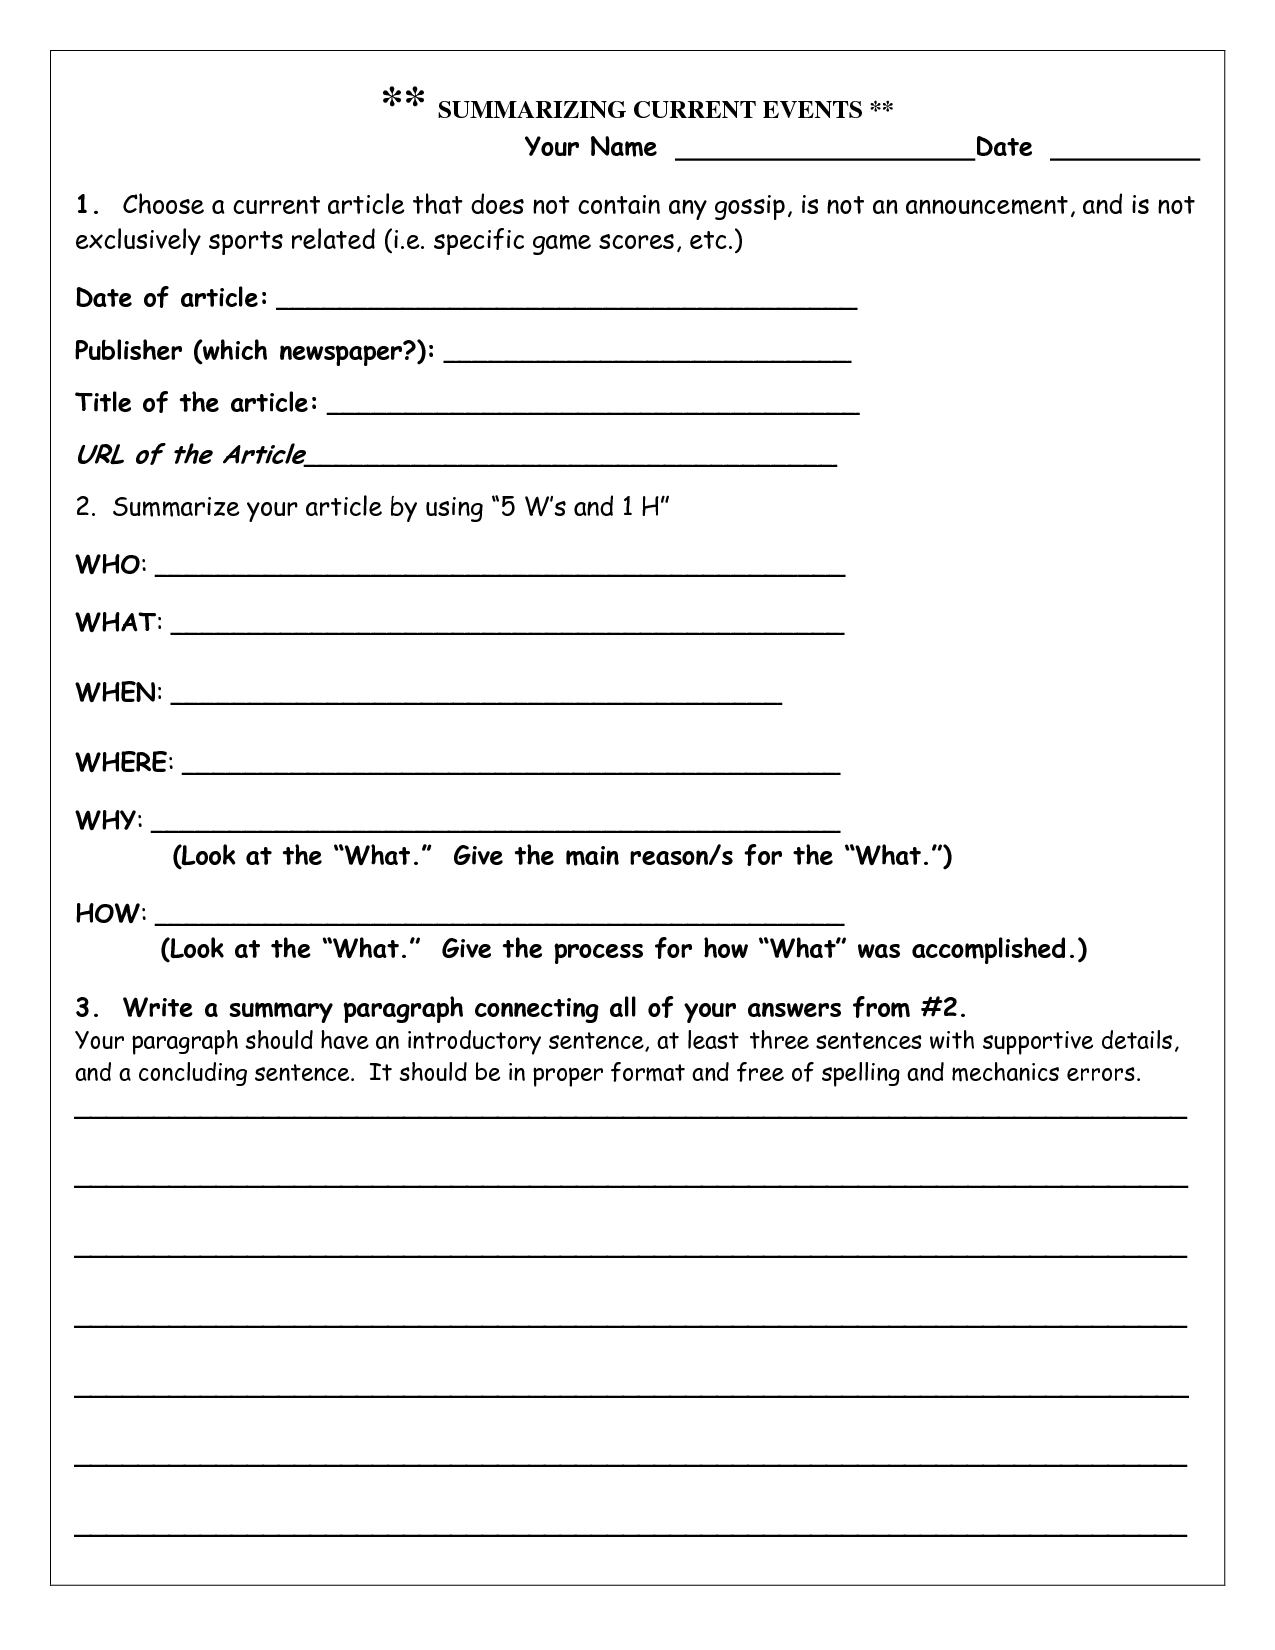 15 Best Images of Using Articles Worksheets - Articles ...